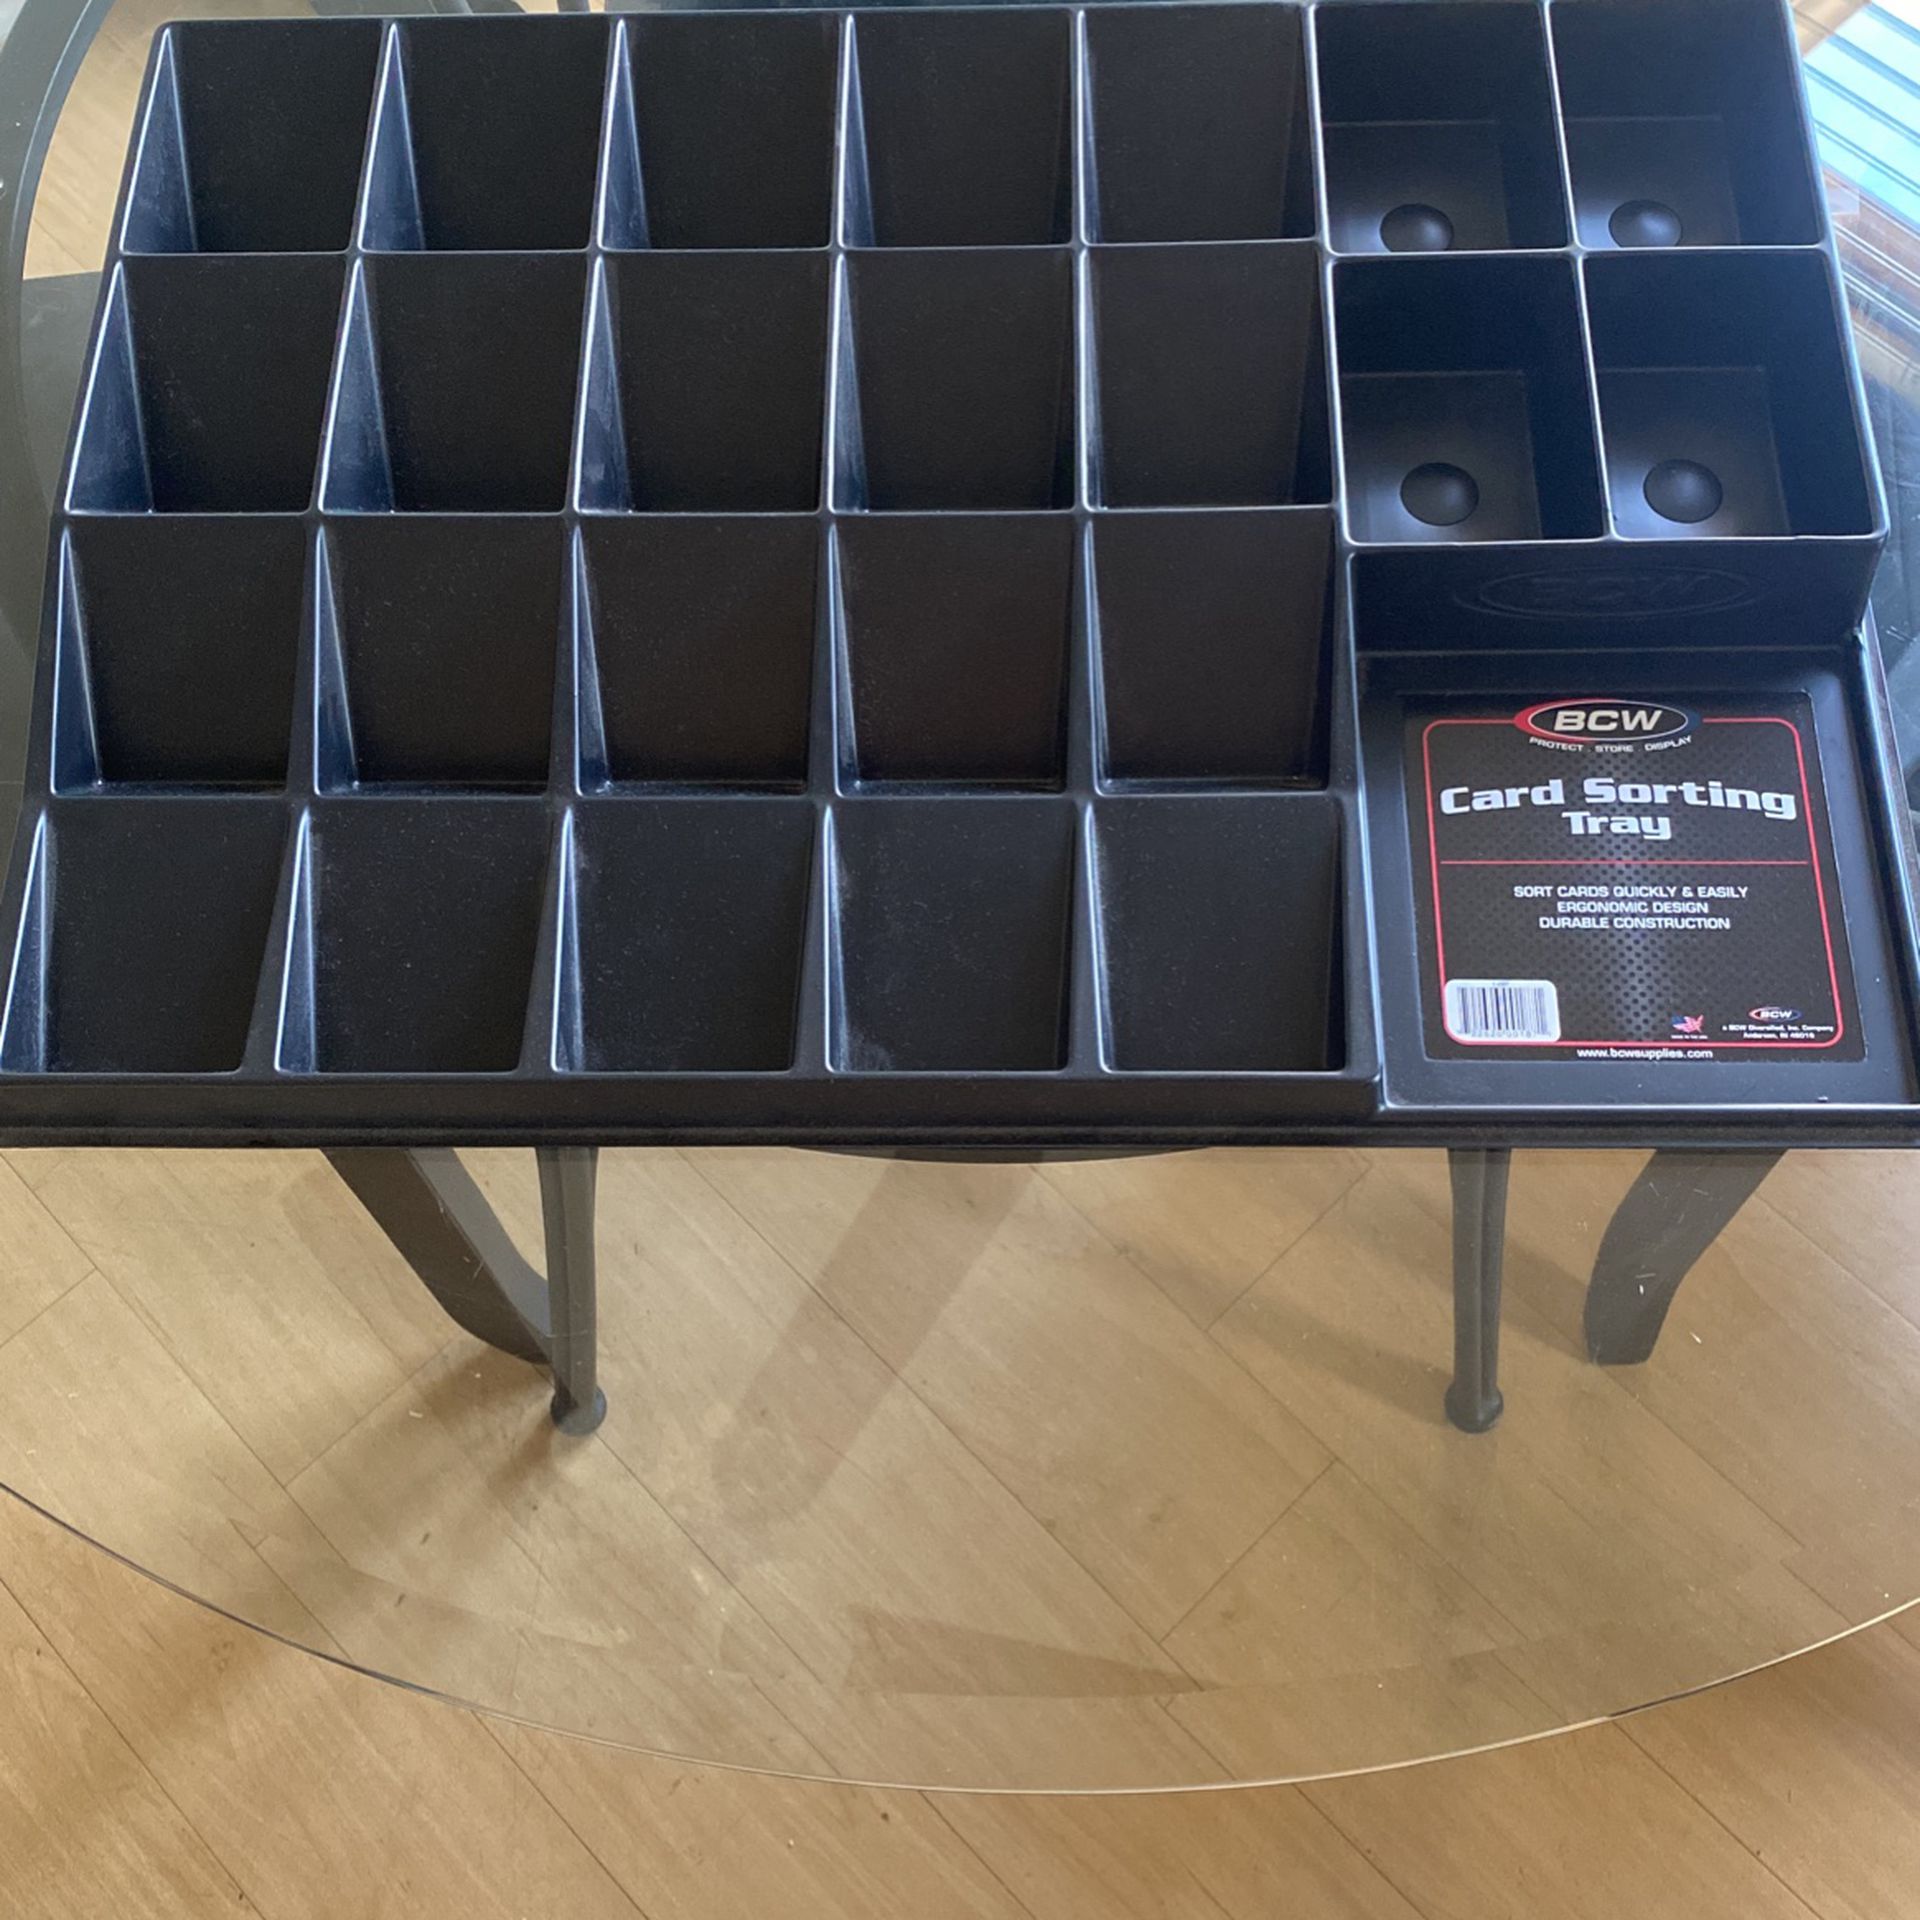 BCW Card Sorting Tray for Sale in Irwindale, CA - OfferUp